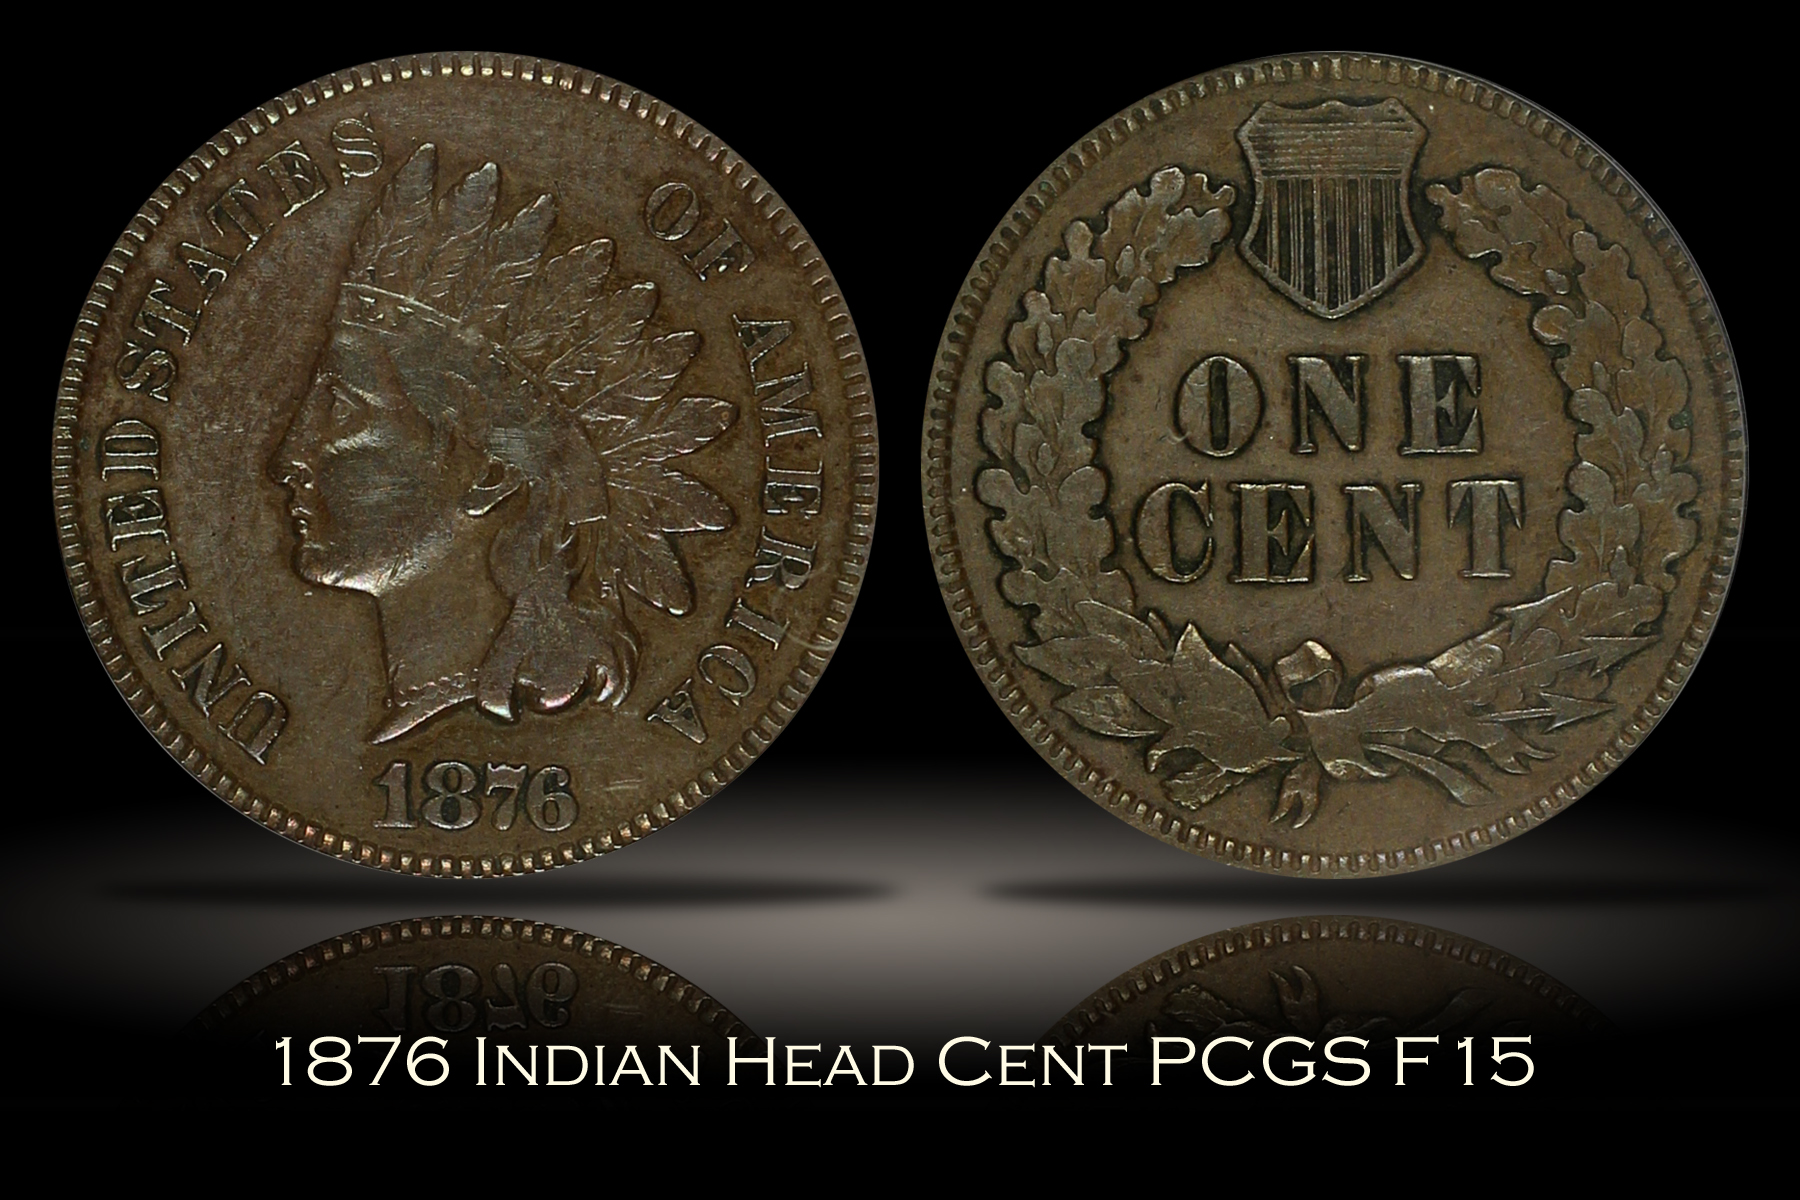 1876 Indian Head Cent PCGS F15